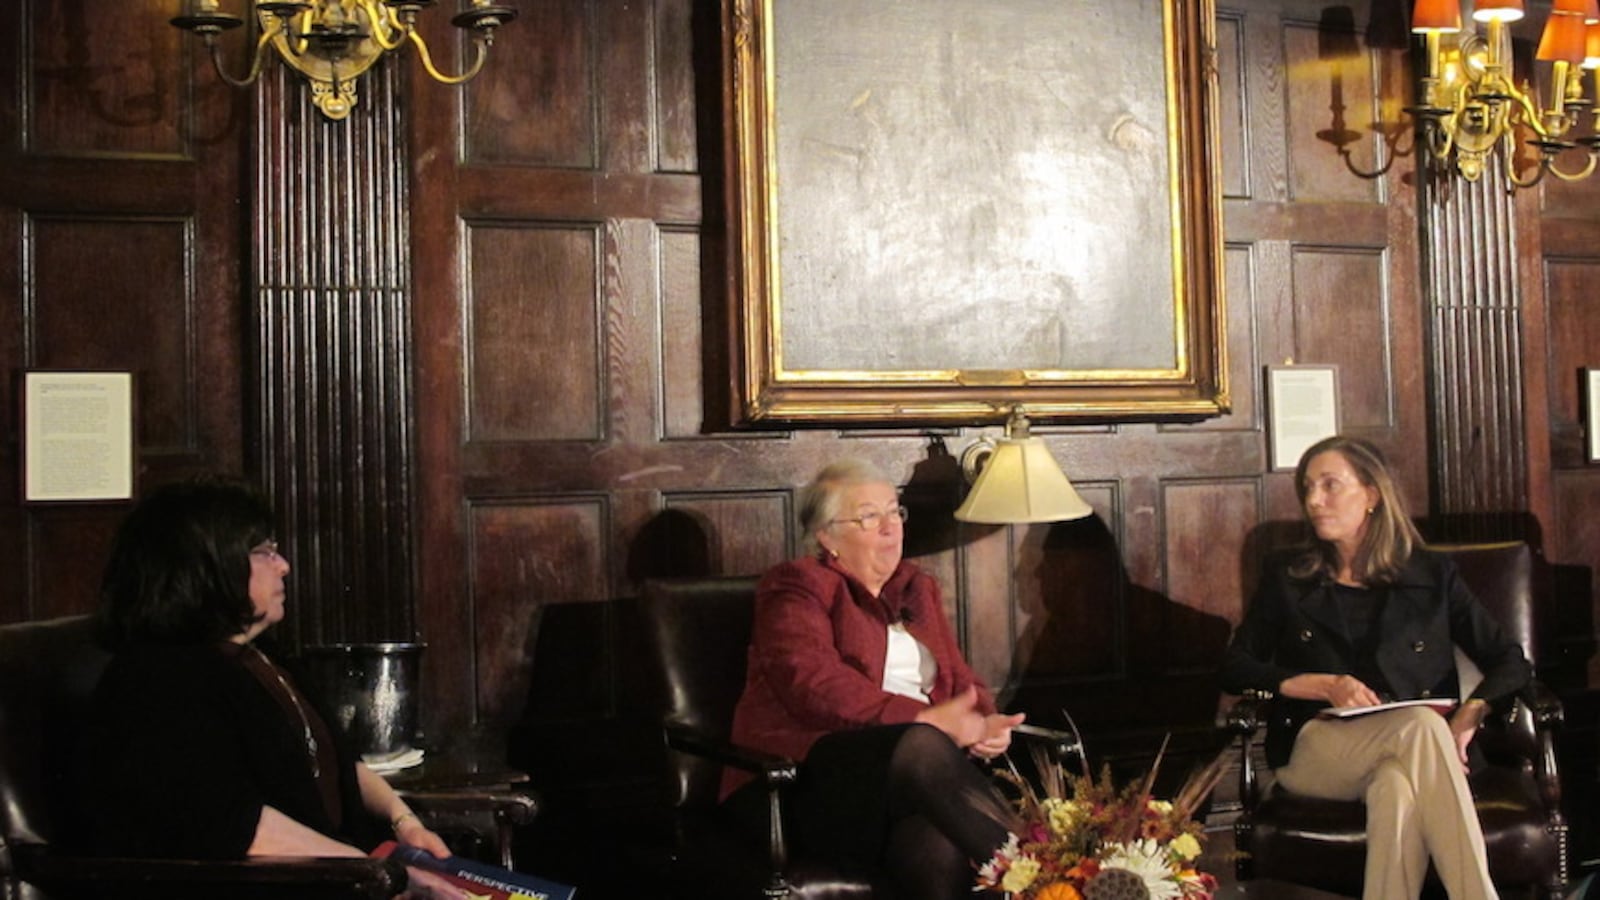 Chancellor Fariña speaks with moderator Jane Williams, right, and Jody Spiro, of the Wallace Foundation, left.